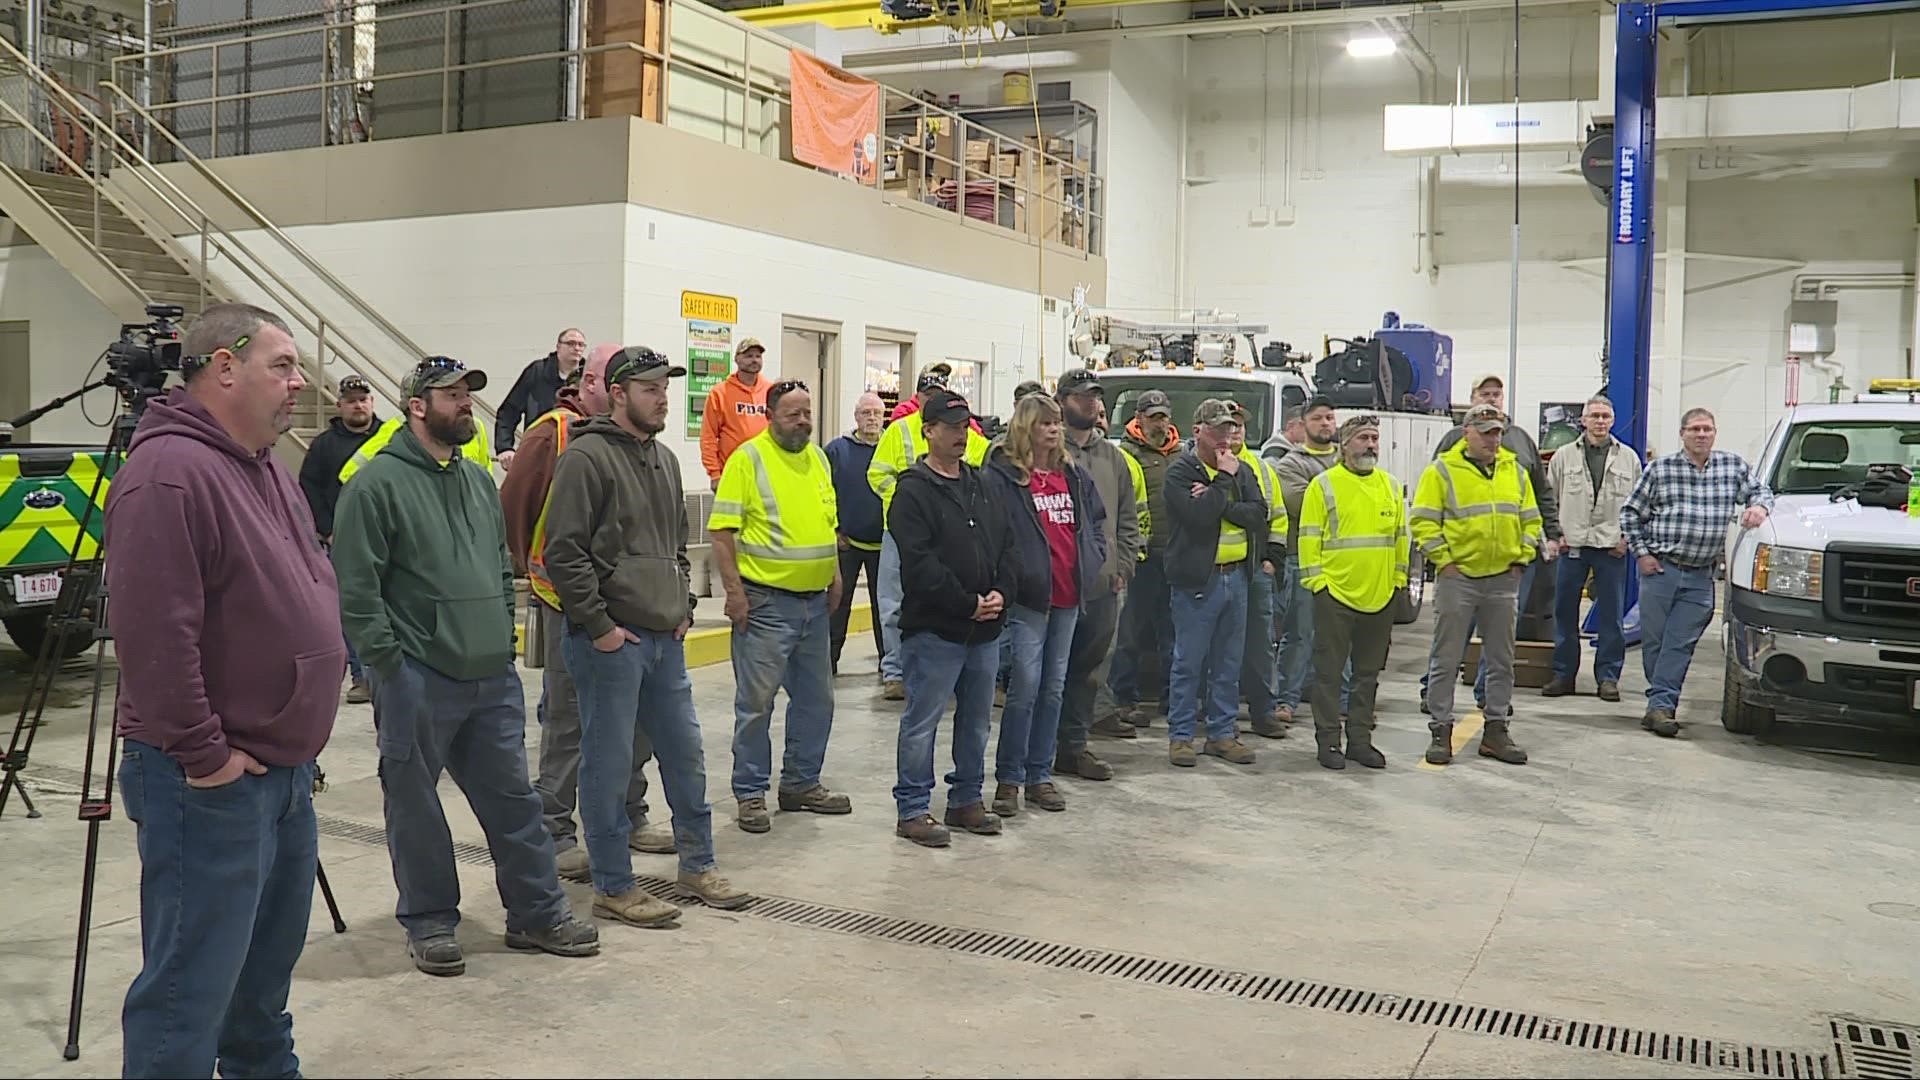 28 crew members left from Ashtabula to help with snow removal for six days.